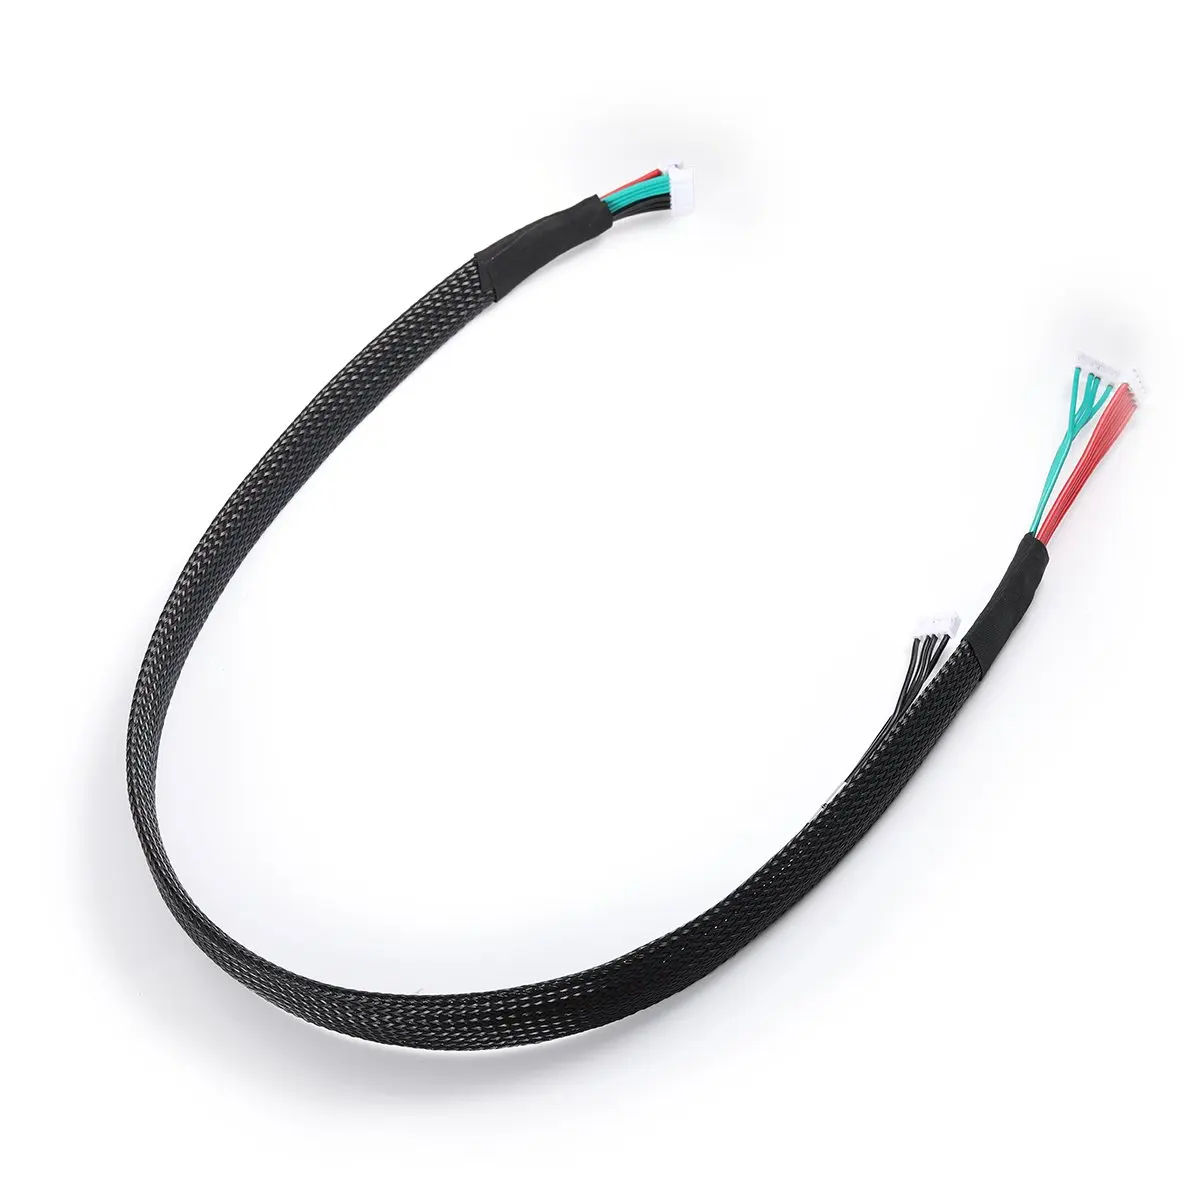 

WIRE HARNESS POWER CORD DATA CORD FOR NEJE PLUS LASER ENGRAVER